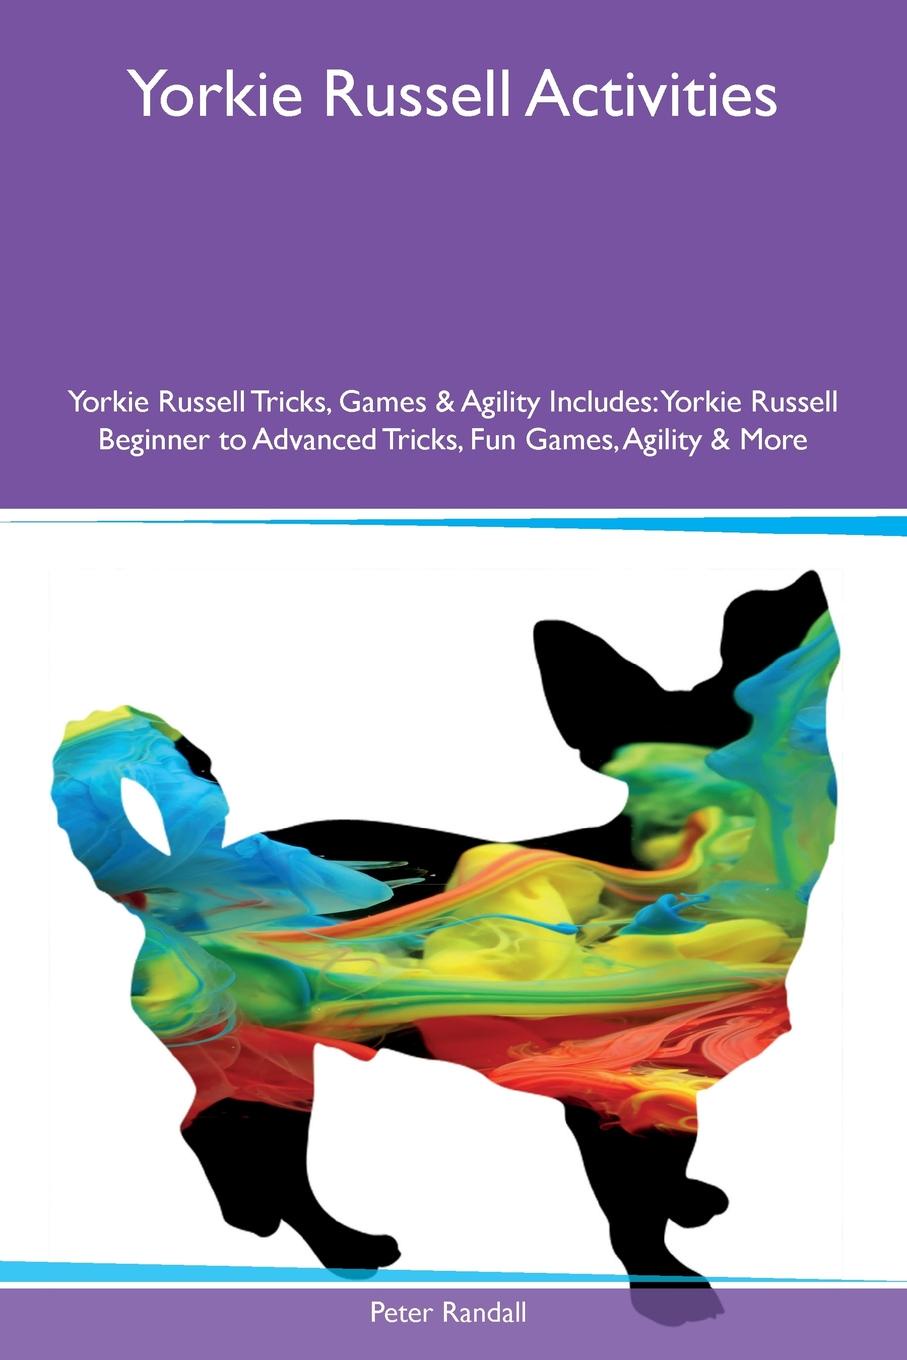 Yorkie Russell Activities Yorkie Russell Tricks, Games & Agility Includes. Yorkie Russell Beginner to Advanced Tricks, Fun Games, Agility & More